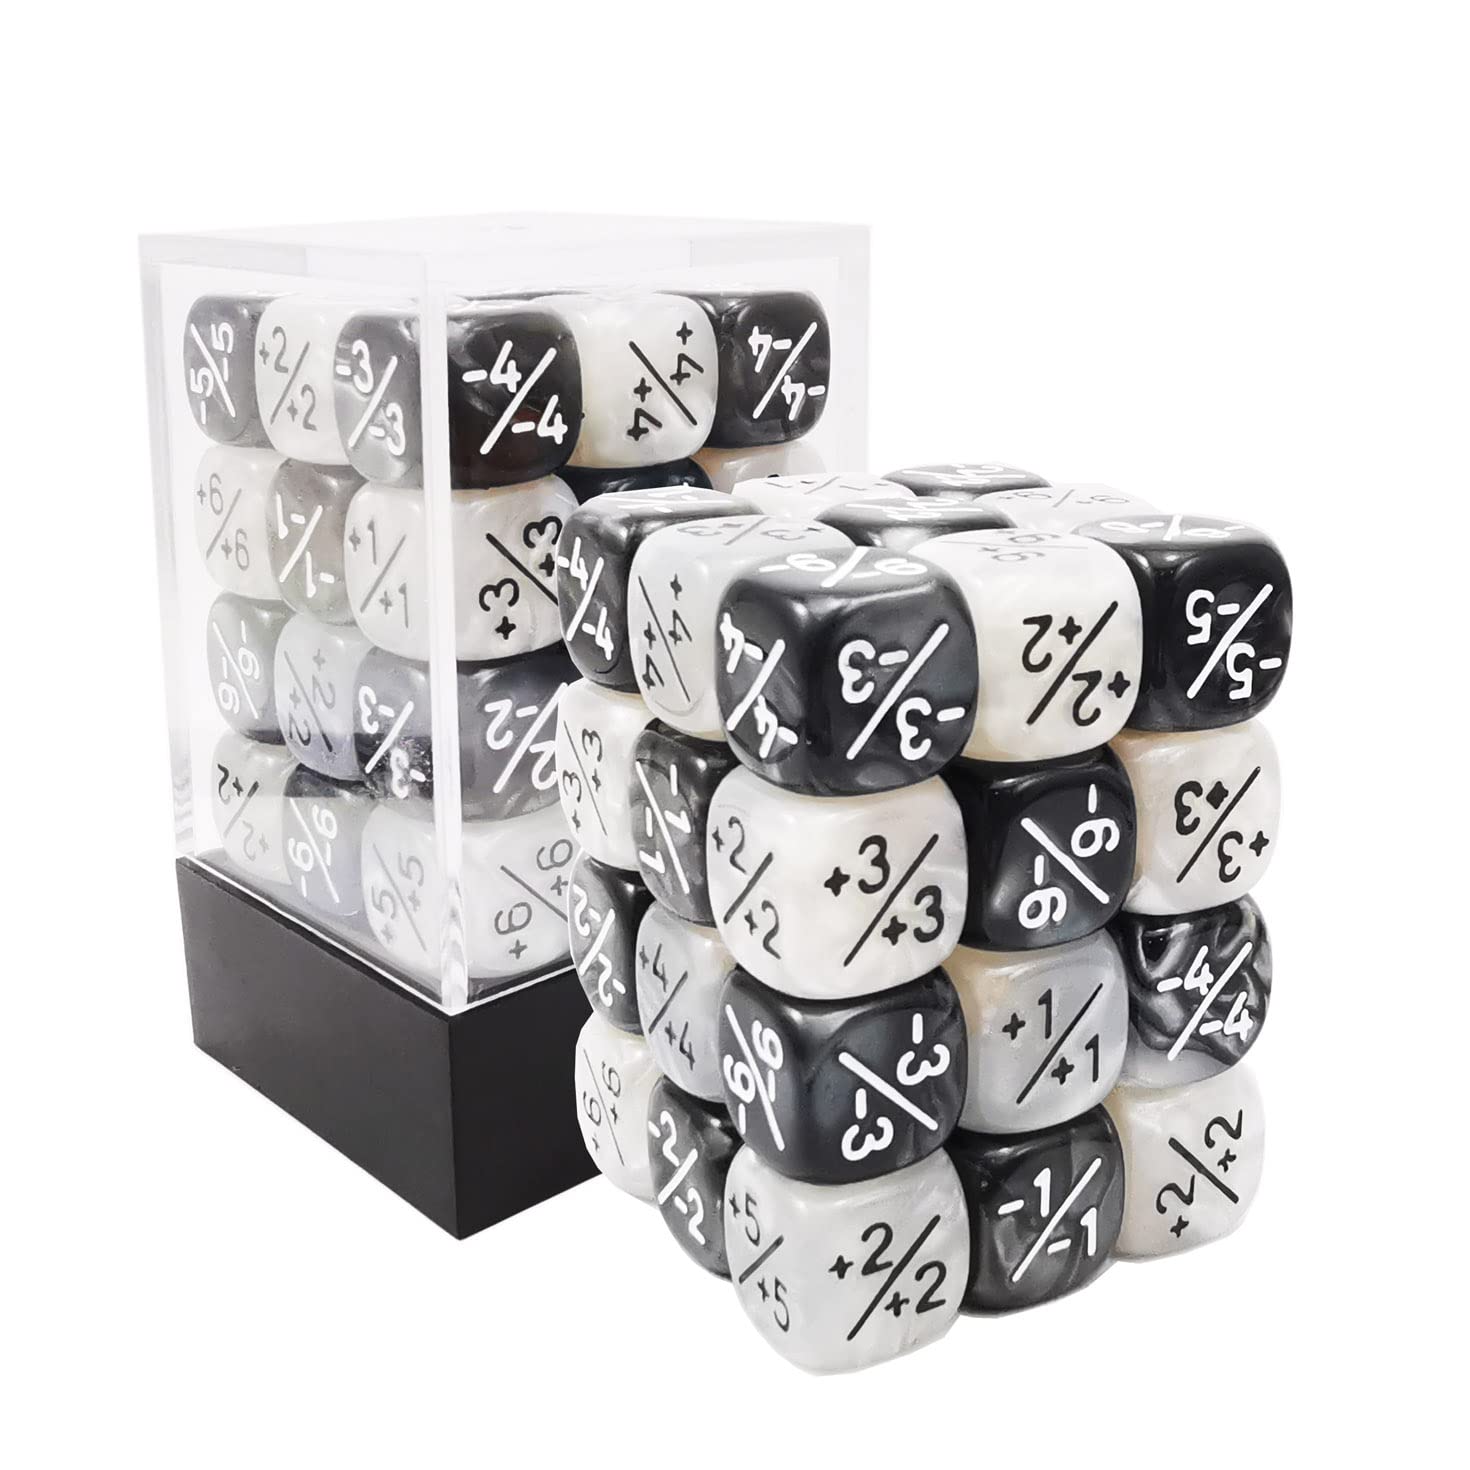 36pcs 12mm Positive and Negative Dice Counters Set, Small Token Dice Loyalty Dice Compatible with MTG, CCG, Card Games